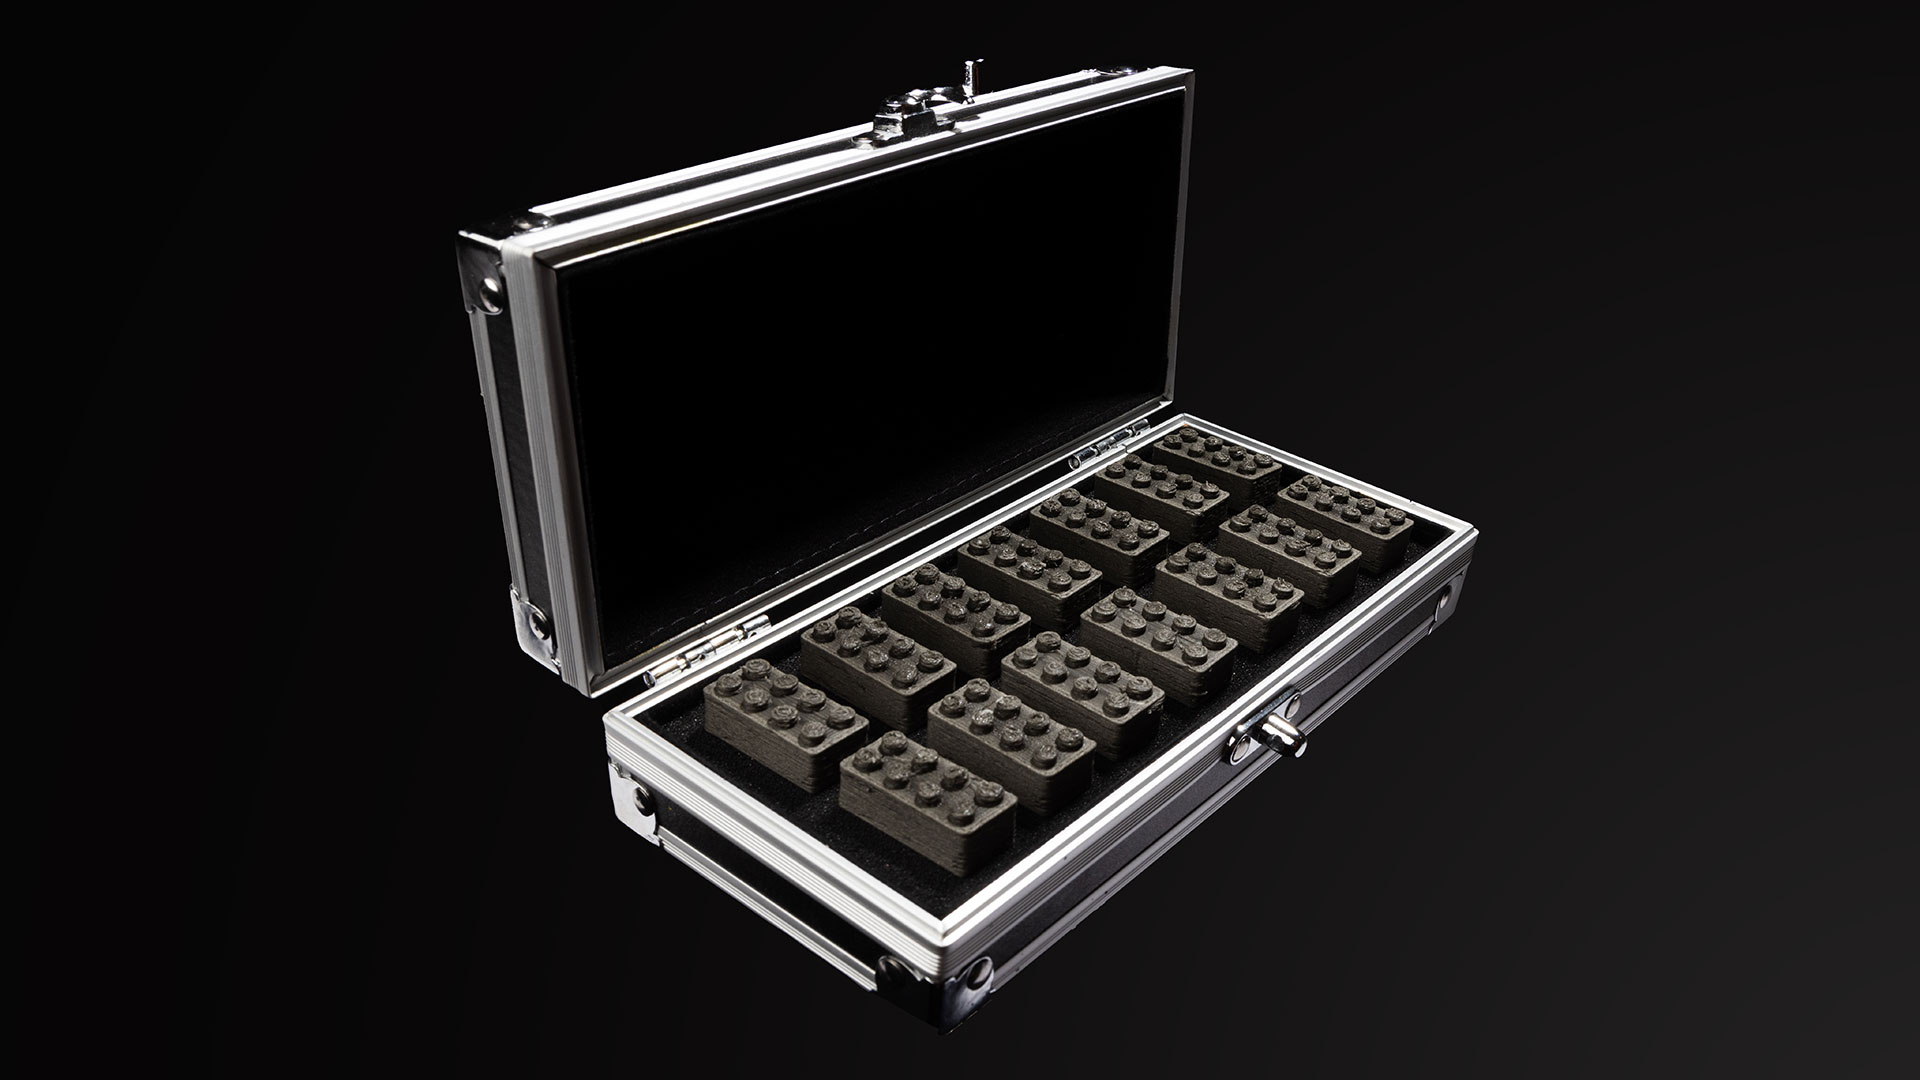 A black striped suitcase filled with 14 gray bricks sits on a black background